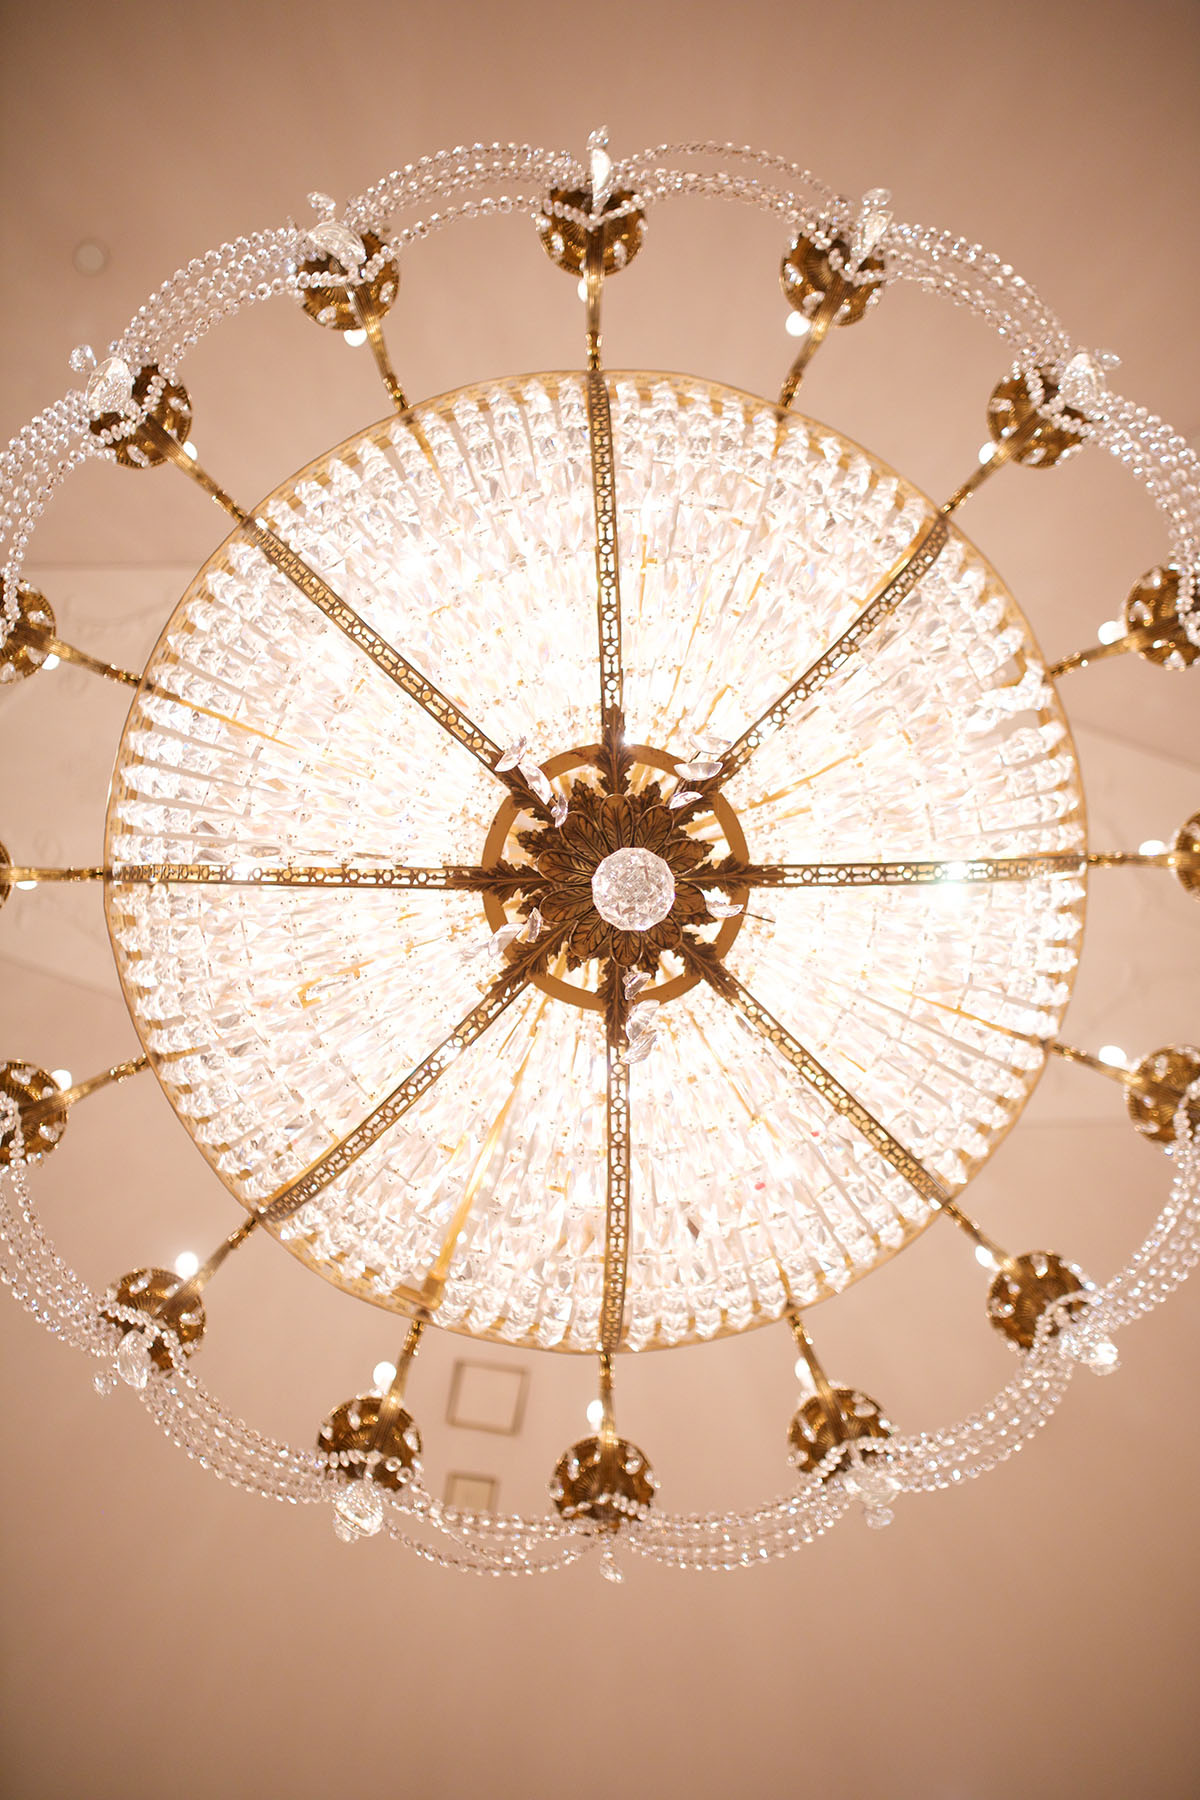 You'll want to a be a guest at this couple's Beauty and the Beast inspired wedding chandelier